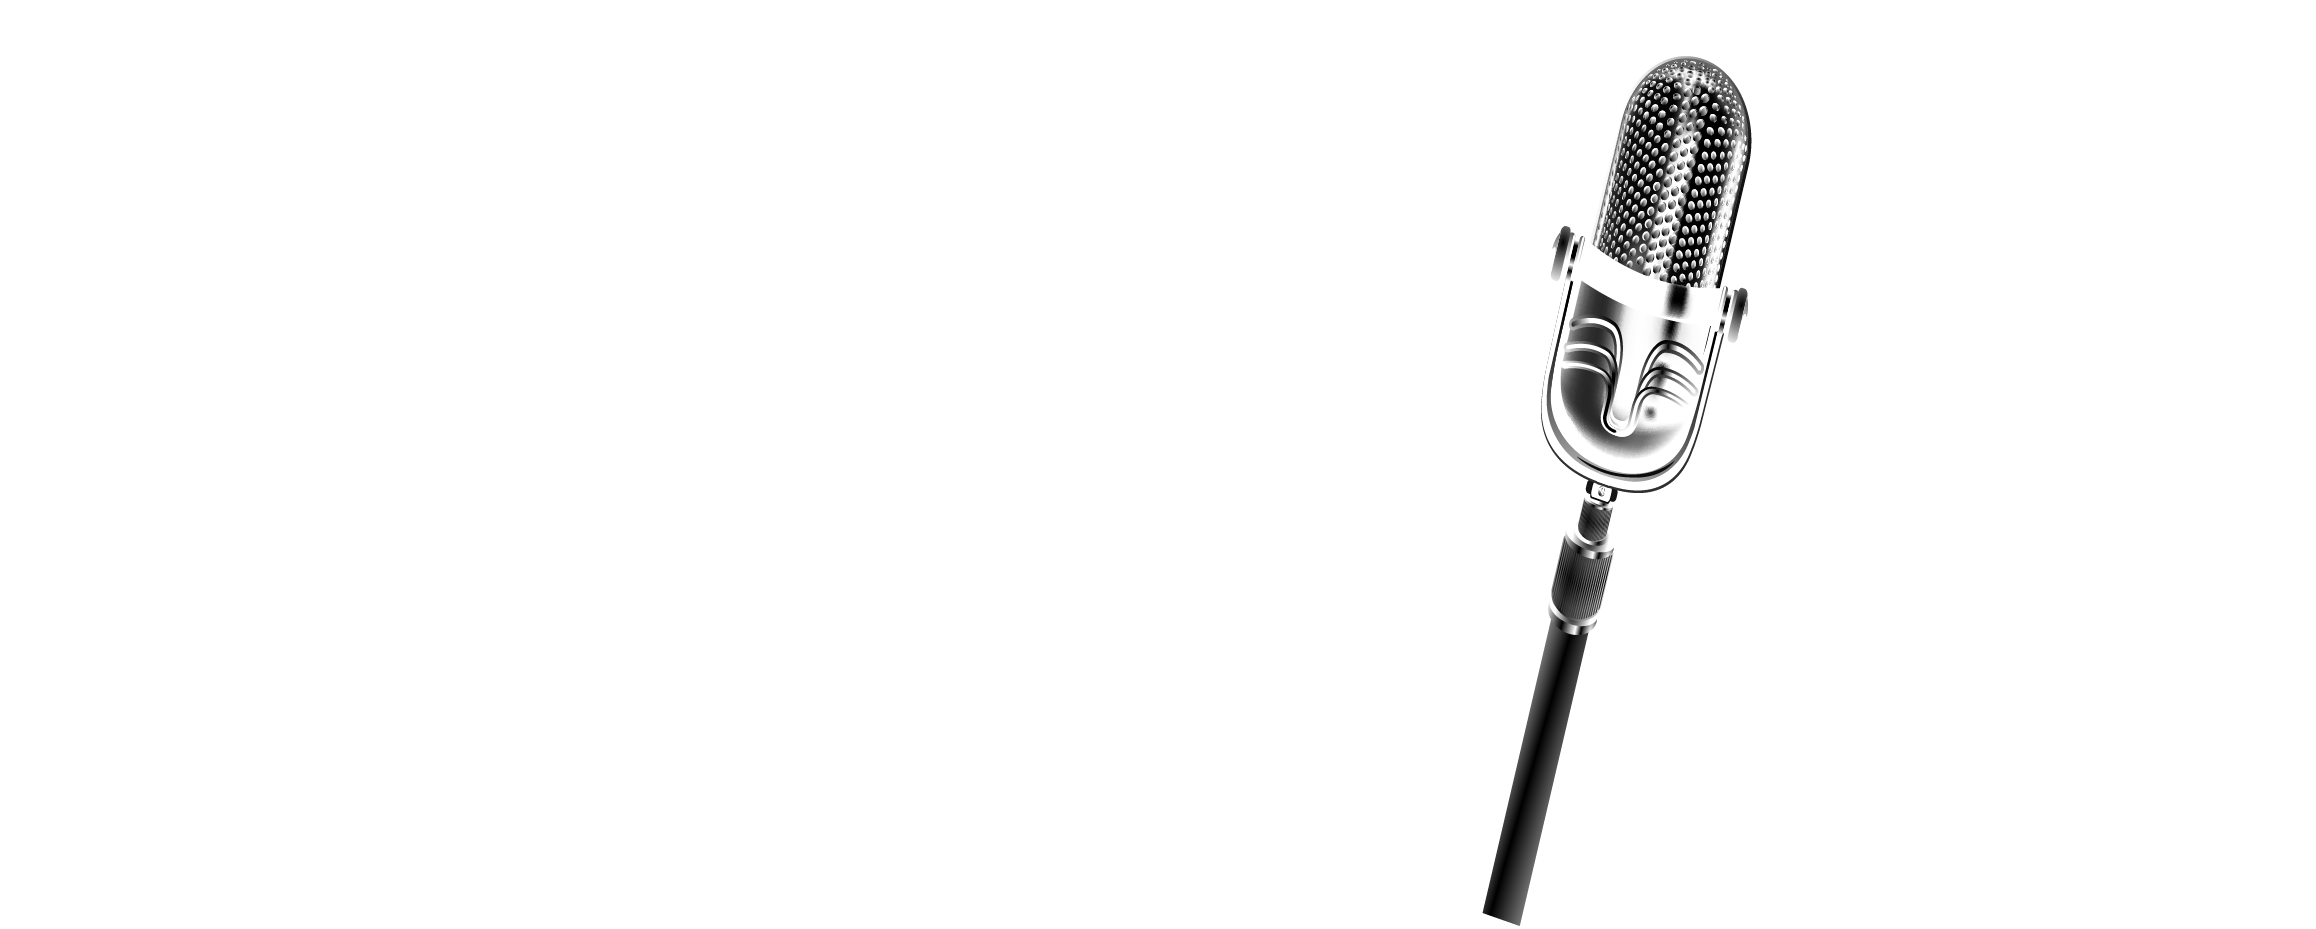 Voiceover Kevin